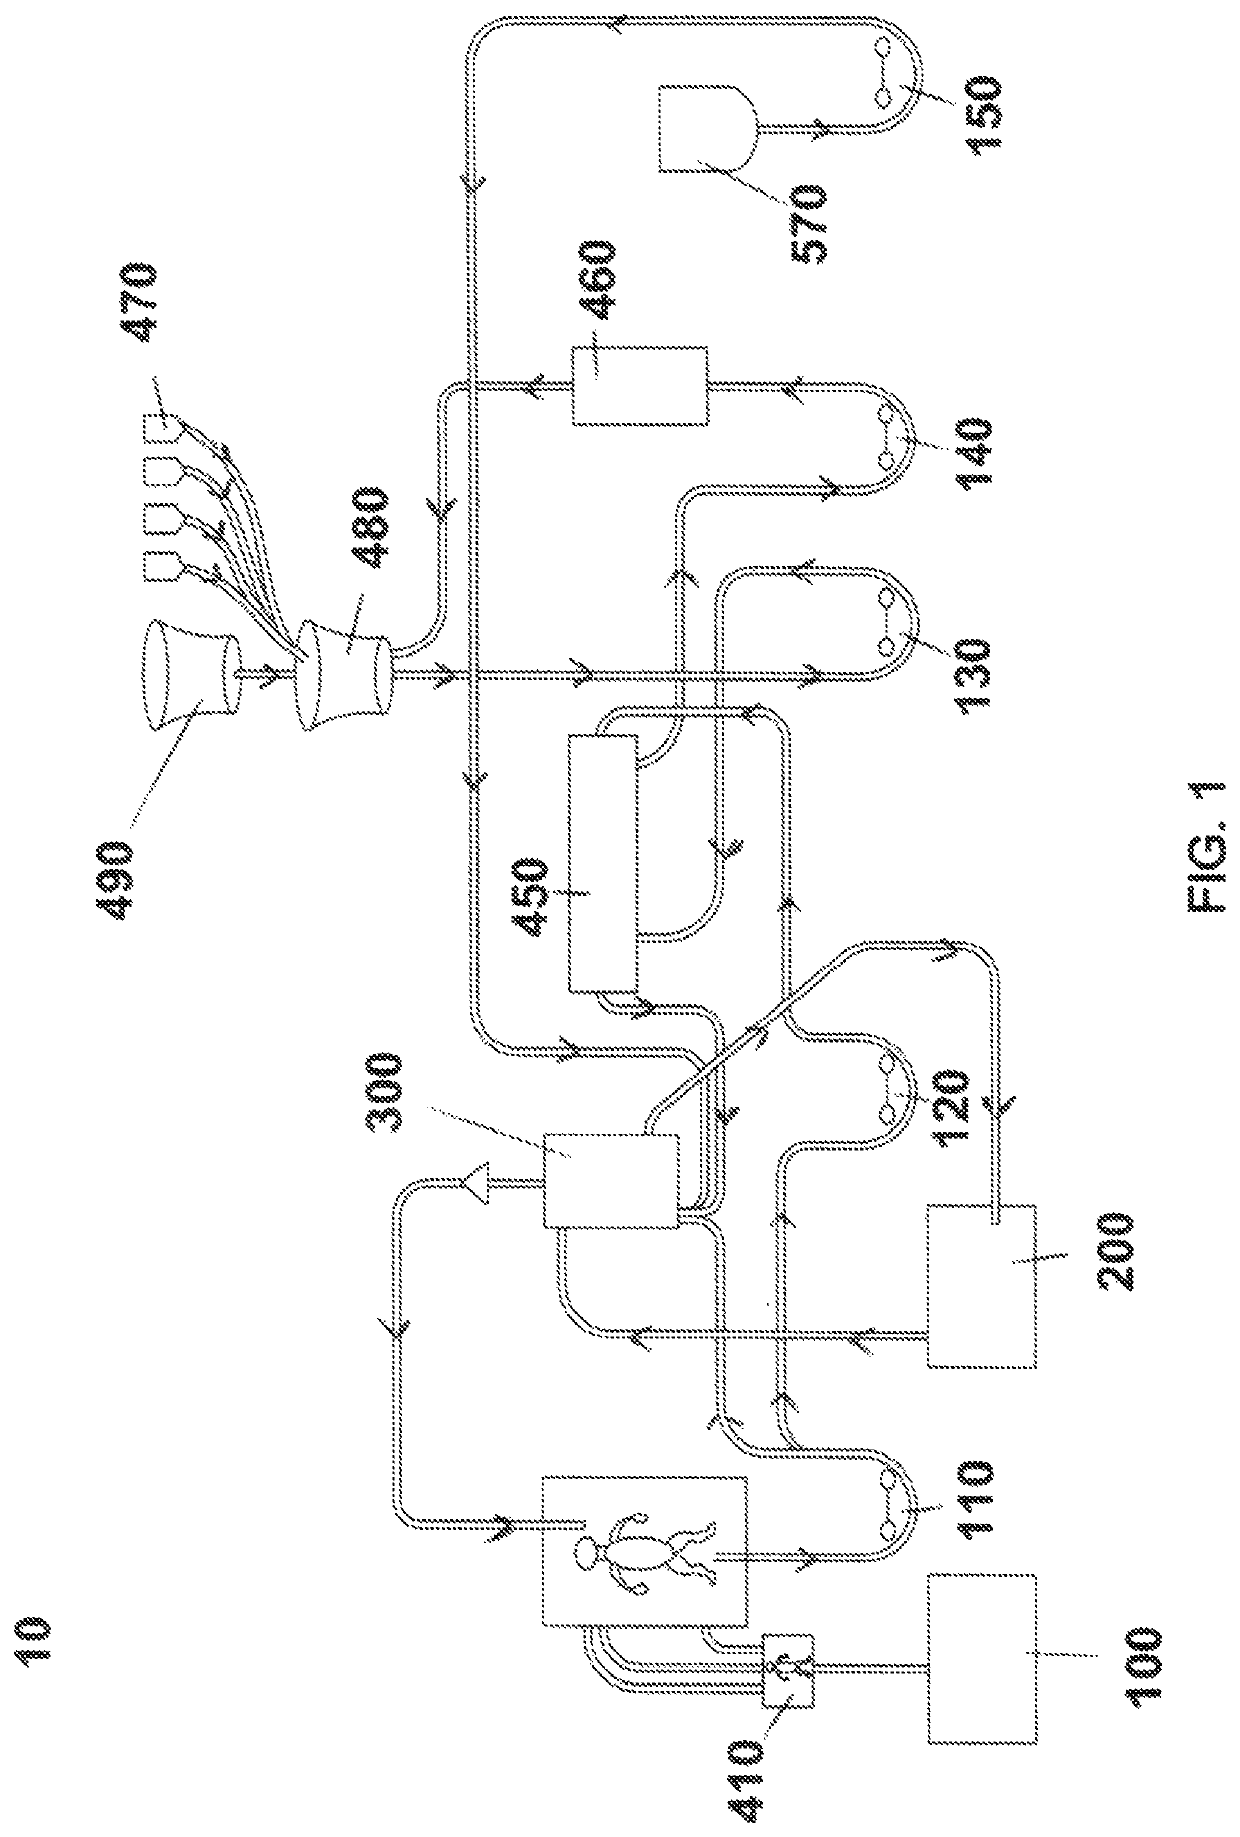 Method and system for controlled hyperthermia